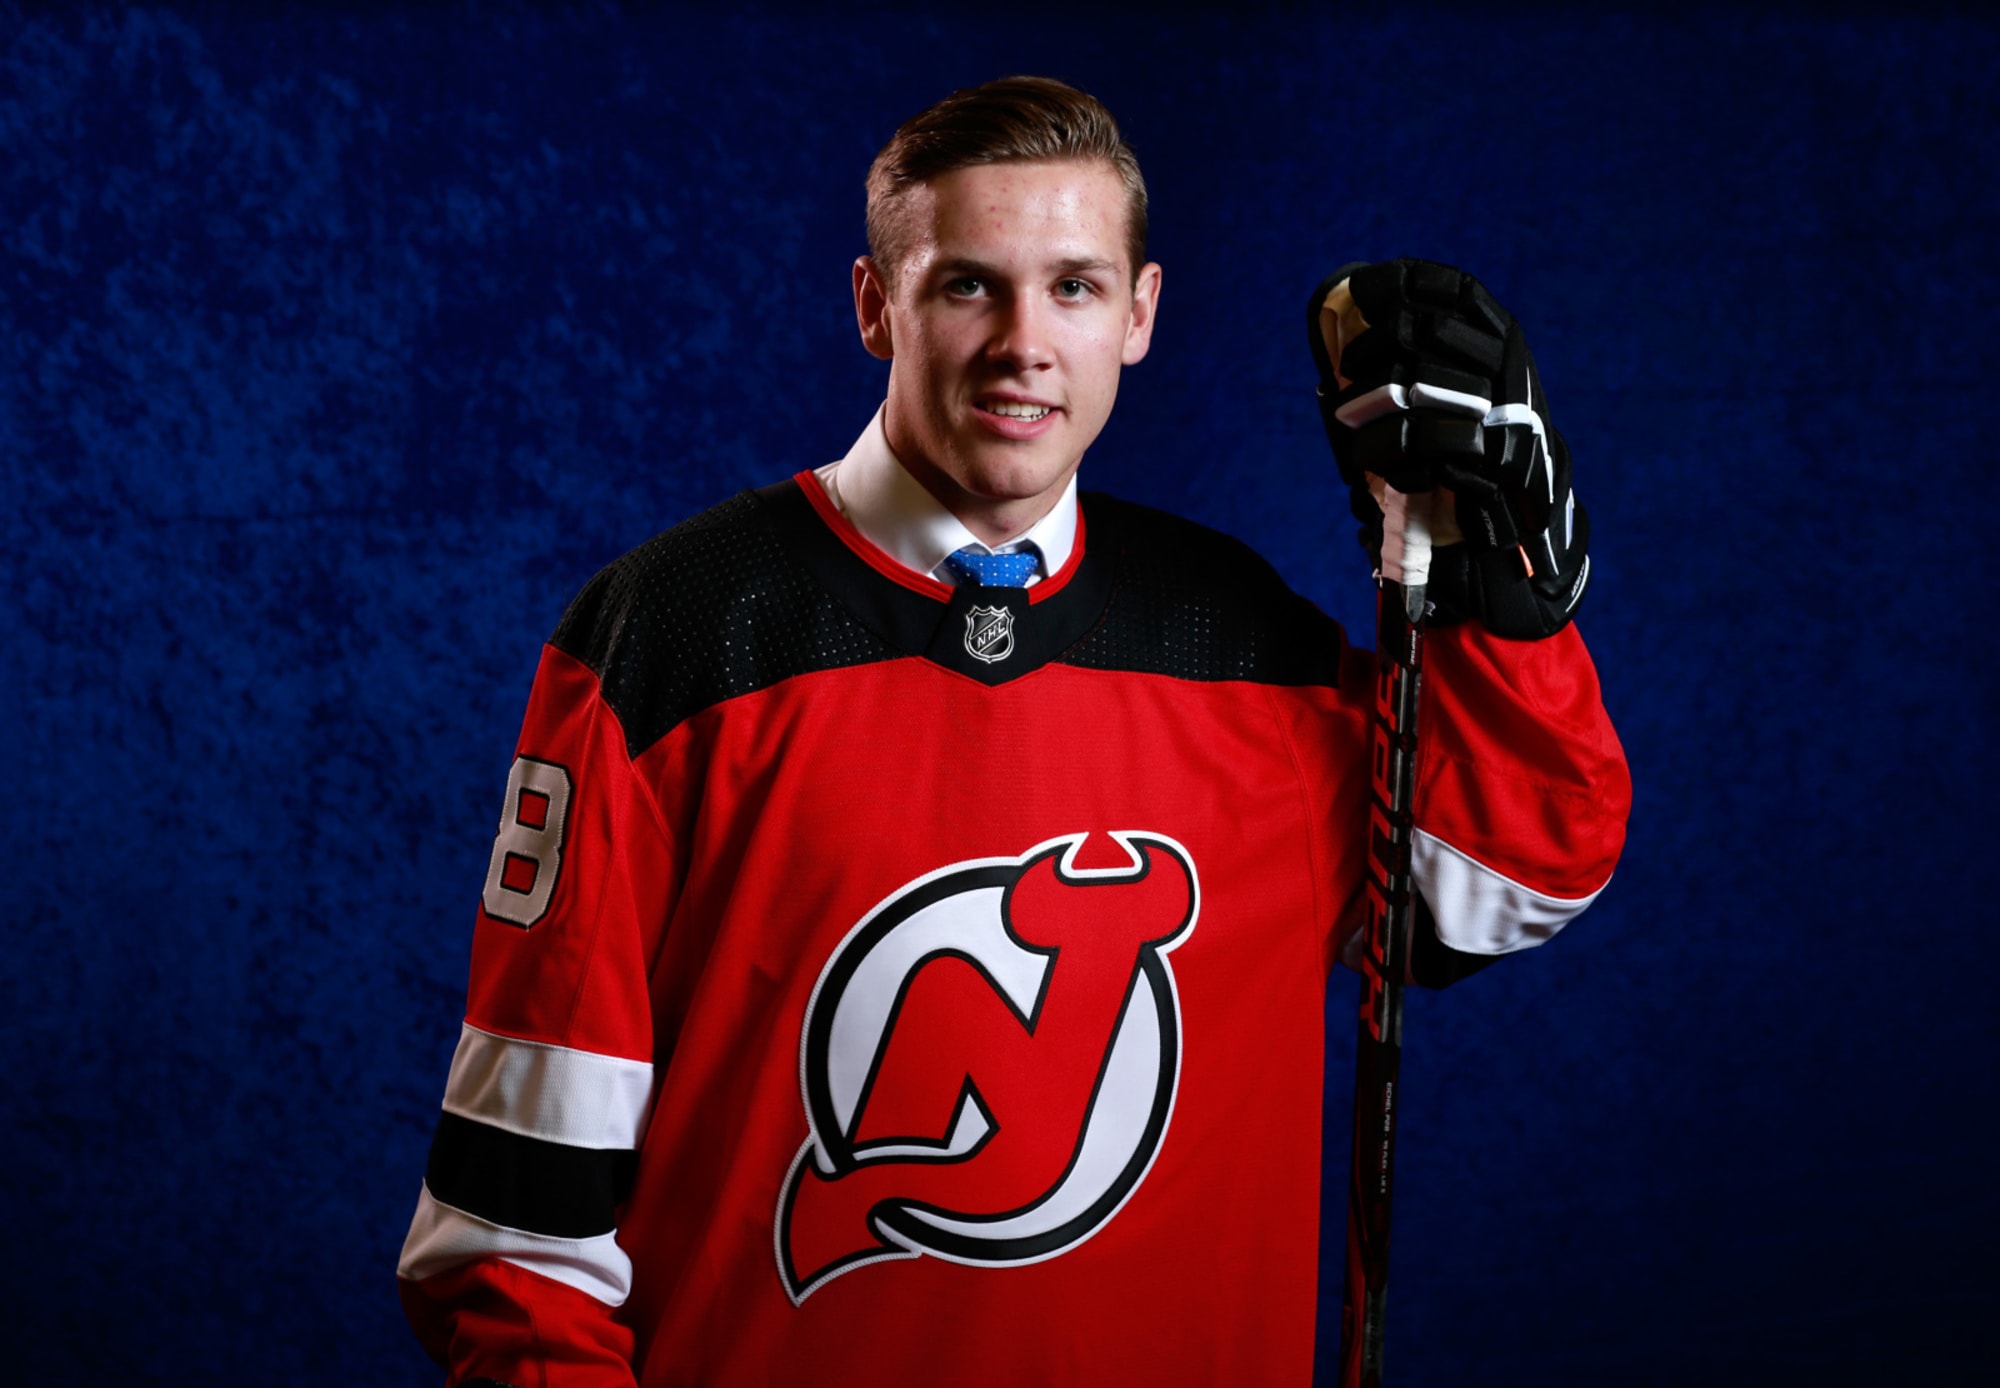 Should the Devils move on from Ty Smith or wait on his potential